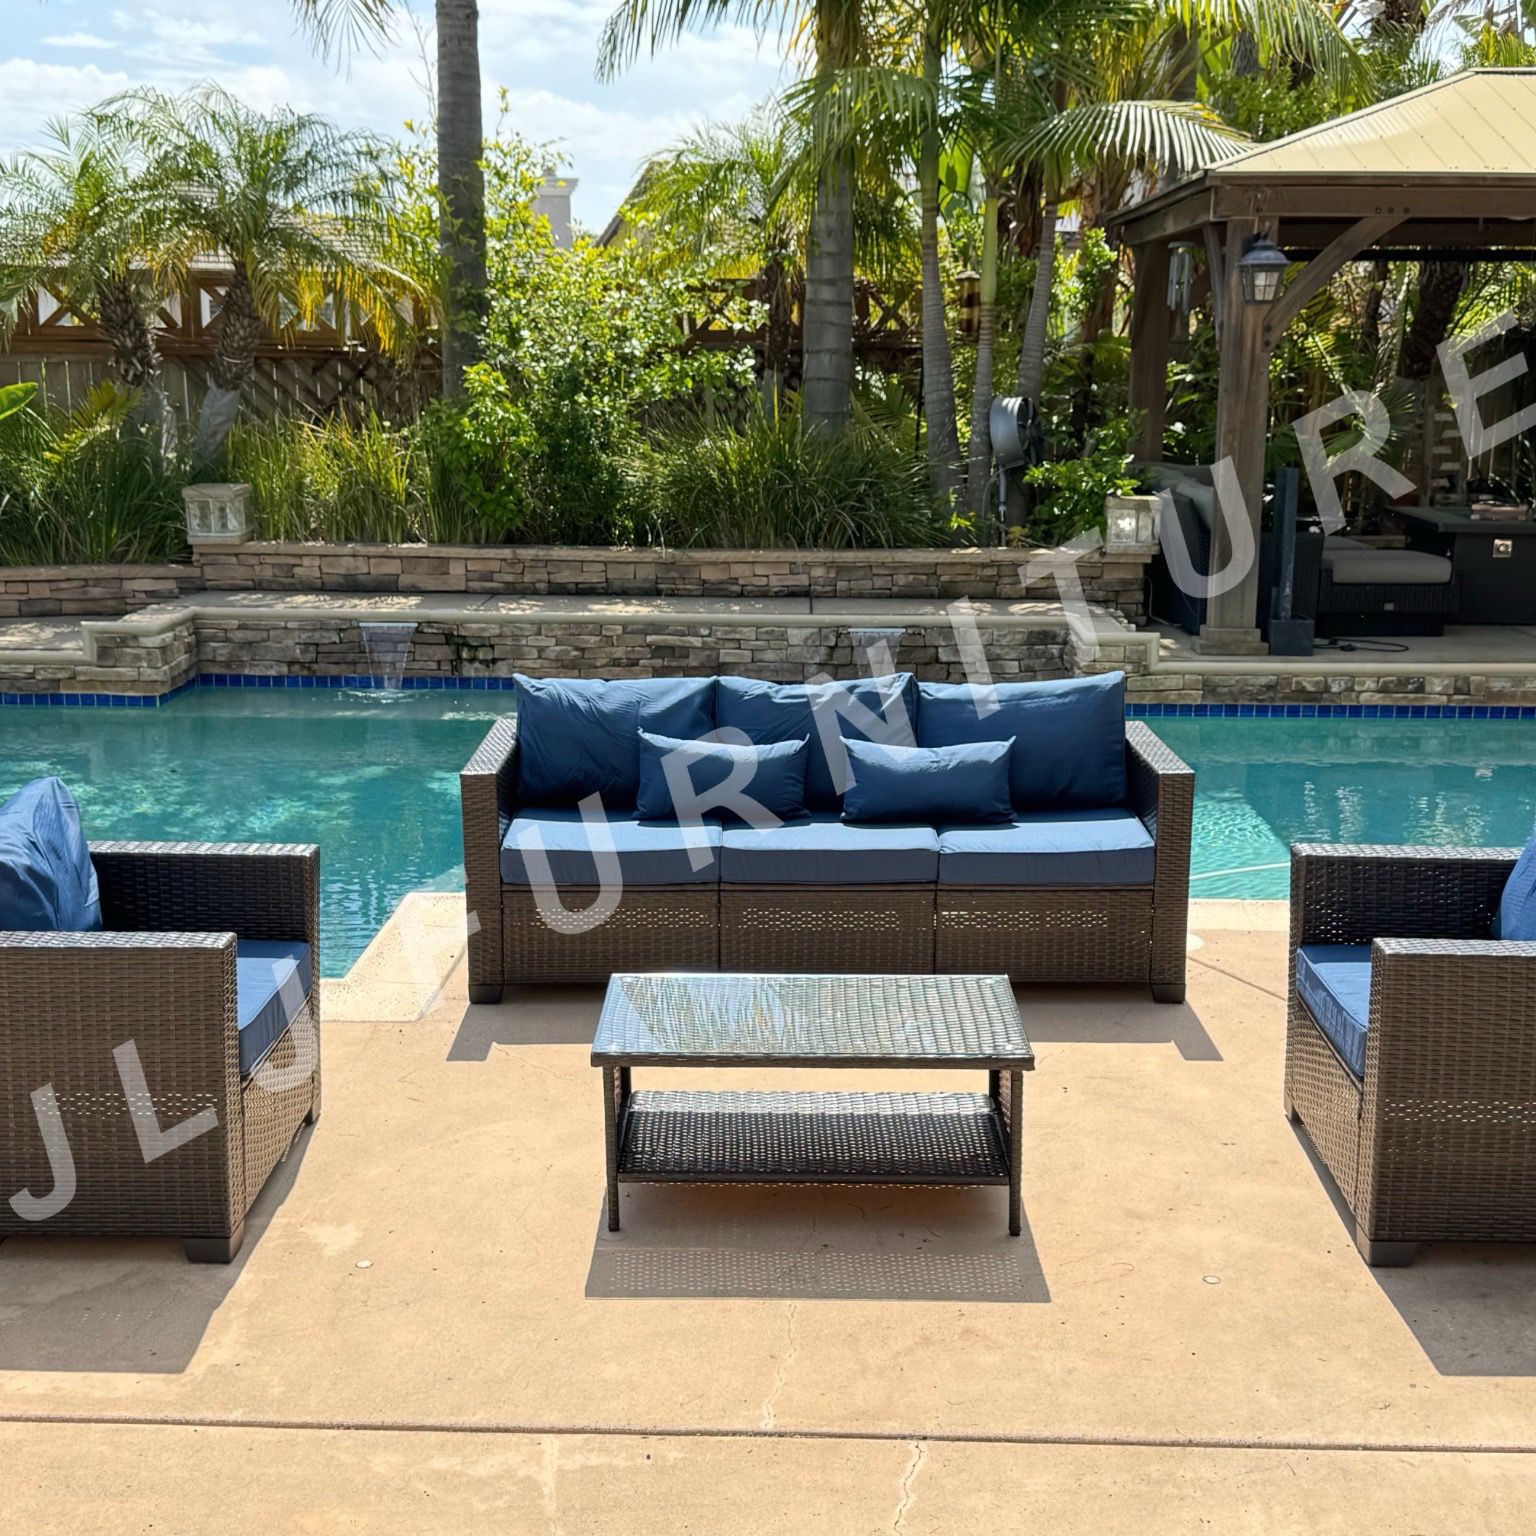 NEW🔥Outdoor Patio Furniture 4 Pc Brown Wicker Sapphire Cushions Conversation Set ASSEMBLED